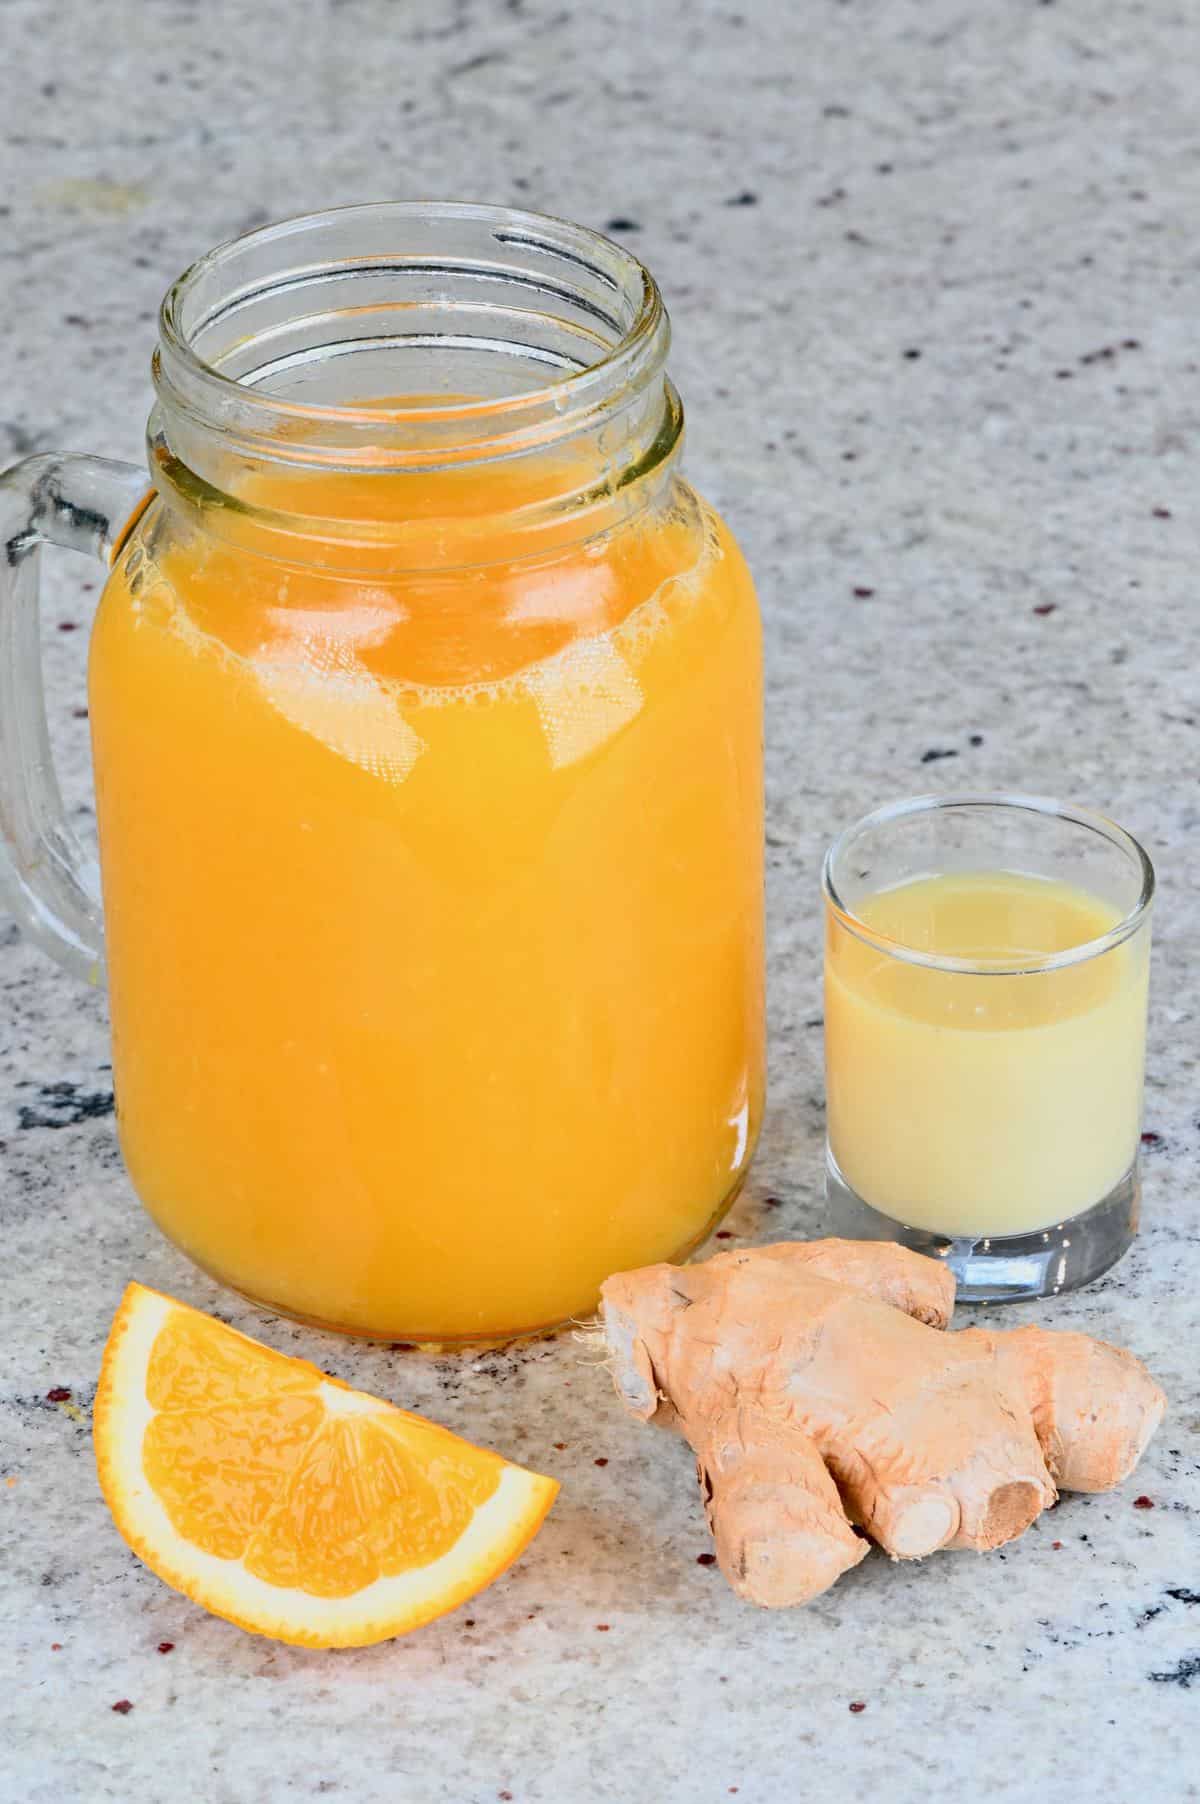 Orange juice in a mason jar and a small glass with ginger juice